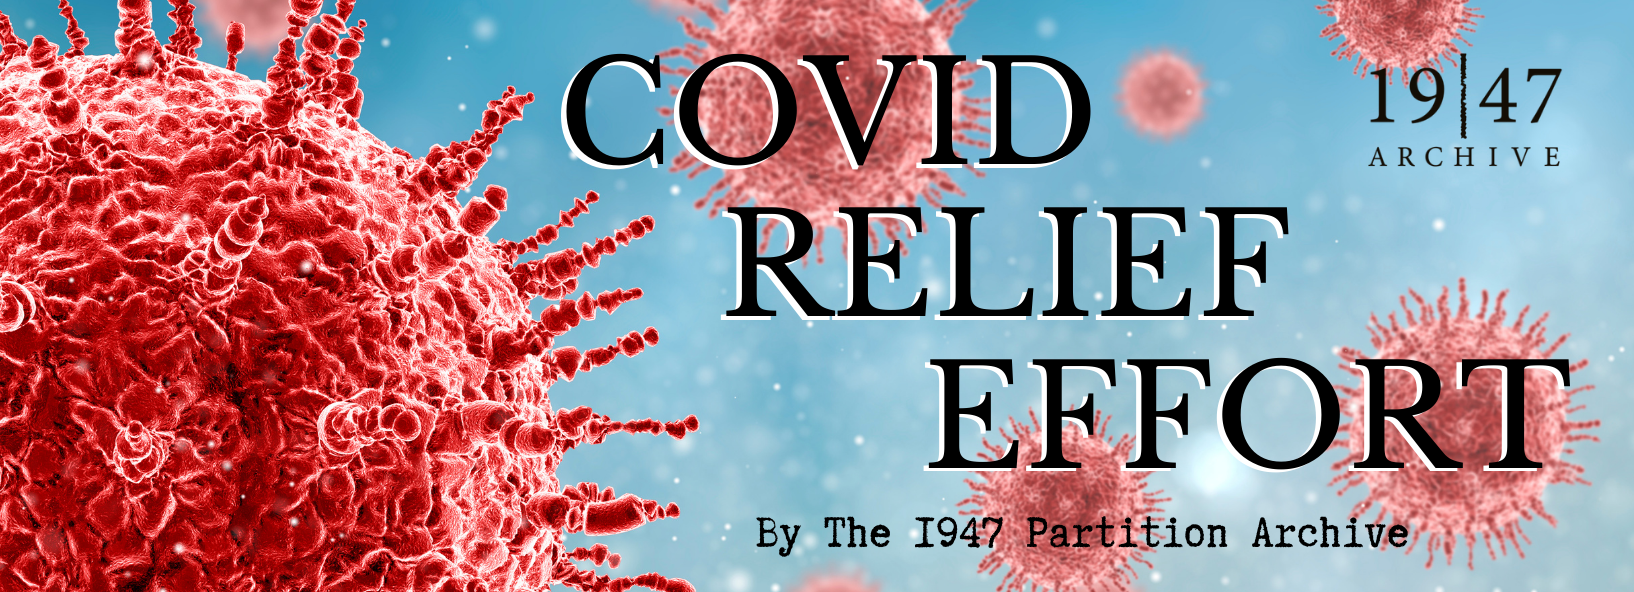 [COVID RELIEF POSTER IMAGE]